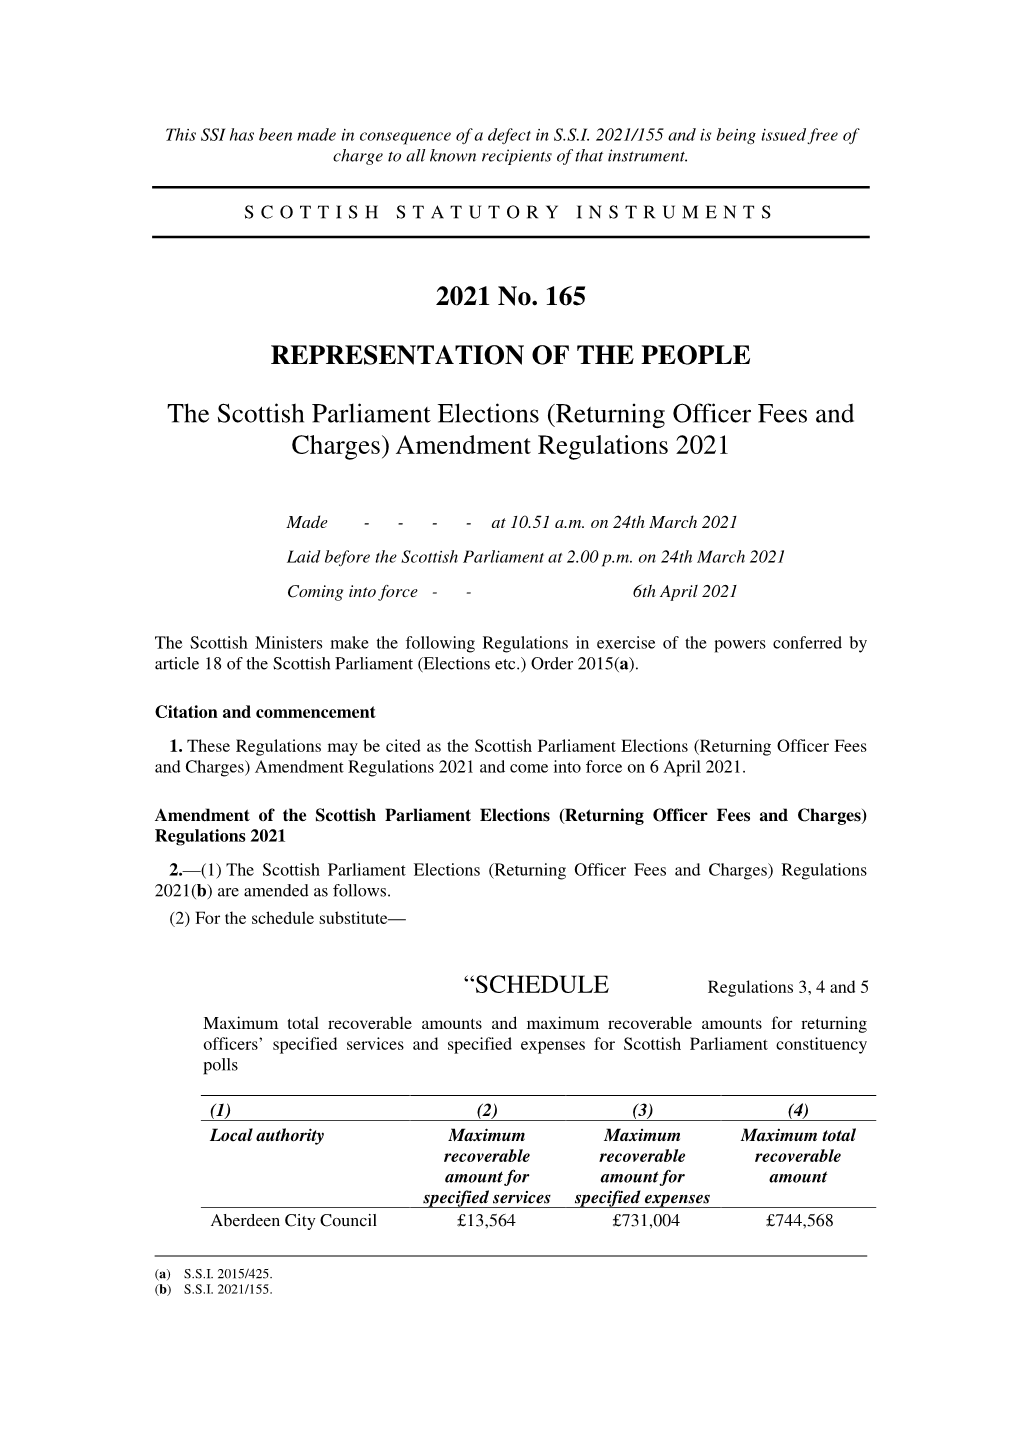 The Scottish Parliament Elections (Returning Officer Fees and Charges) Amendment Regulations 2021